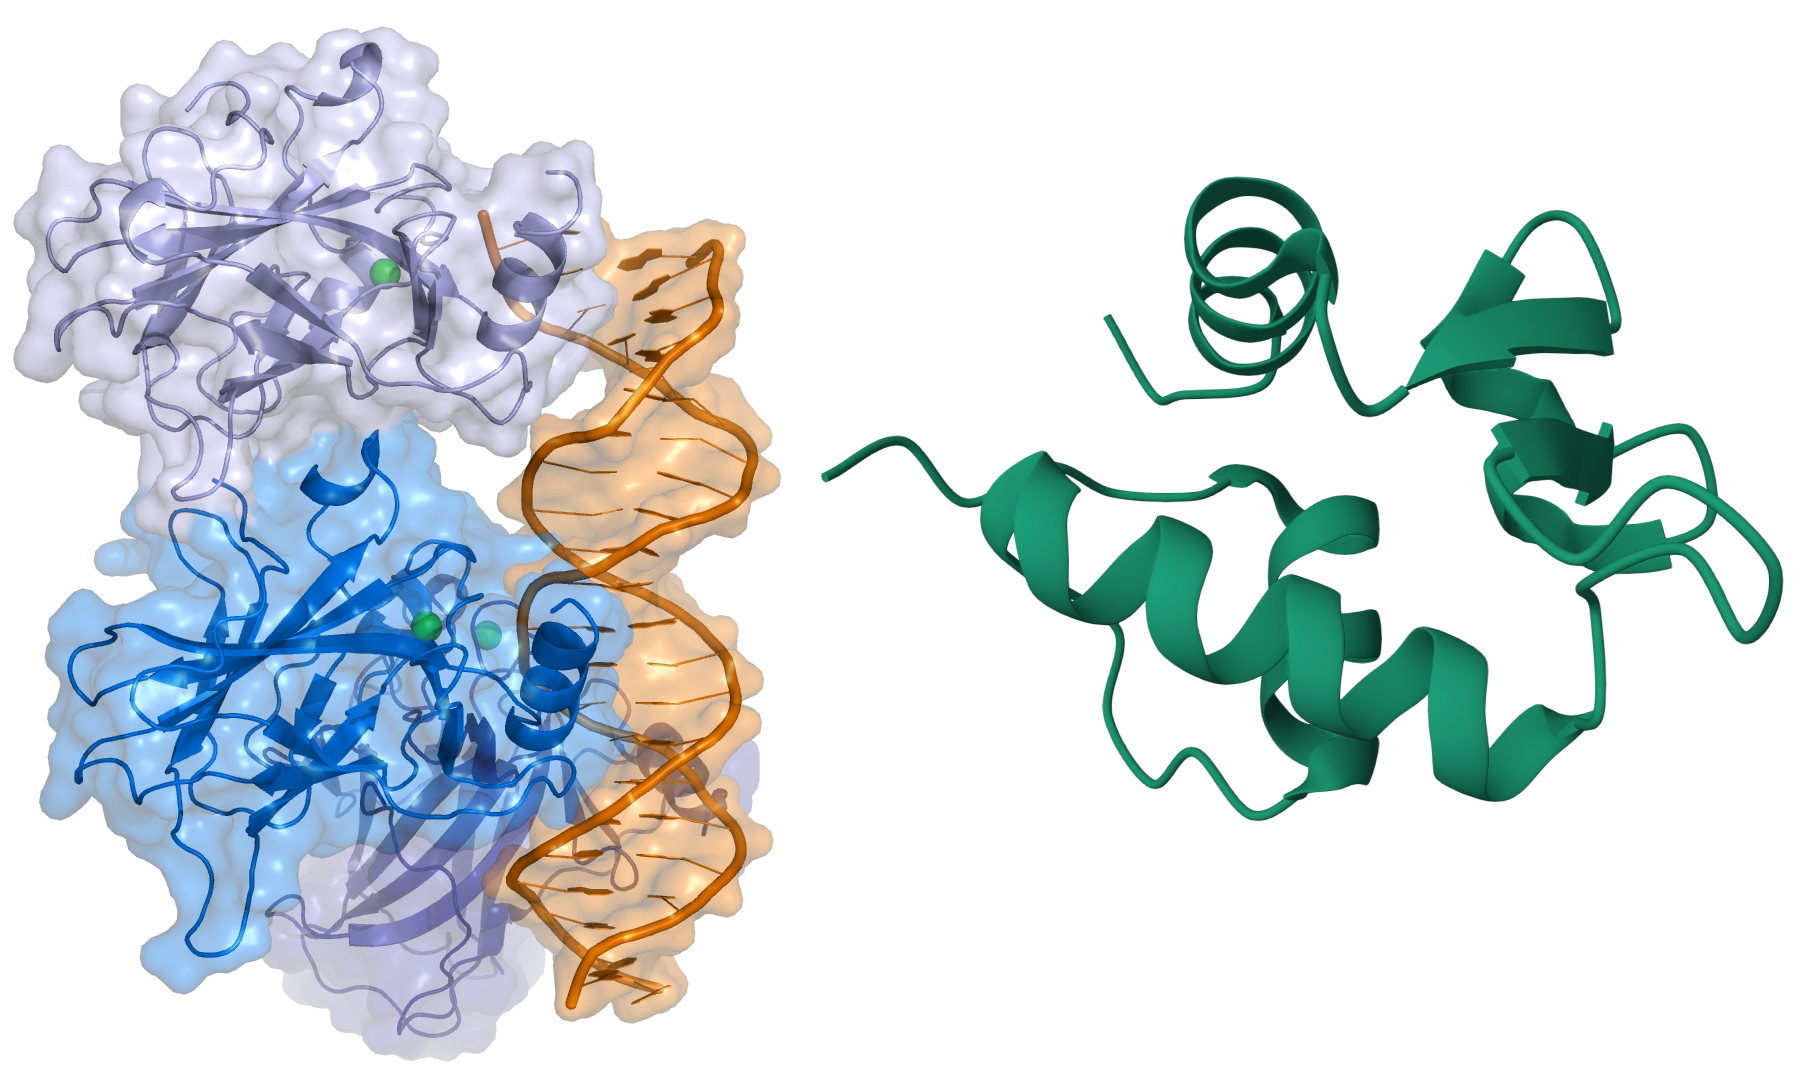 Image on the left of p53 by Wikimedia/Thomas Splettstoesser and protein MDM2 on the right (PDB: 4IPF)